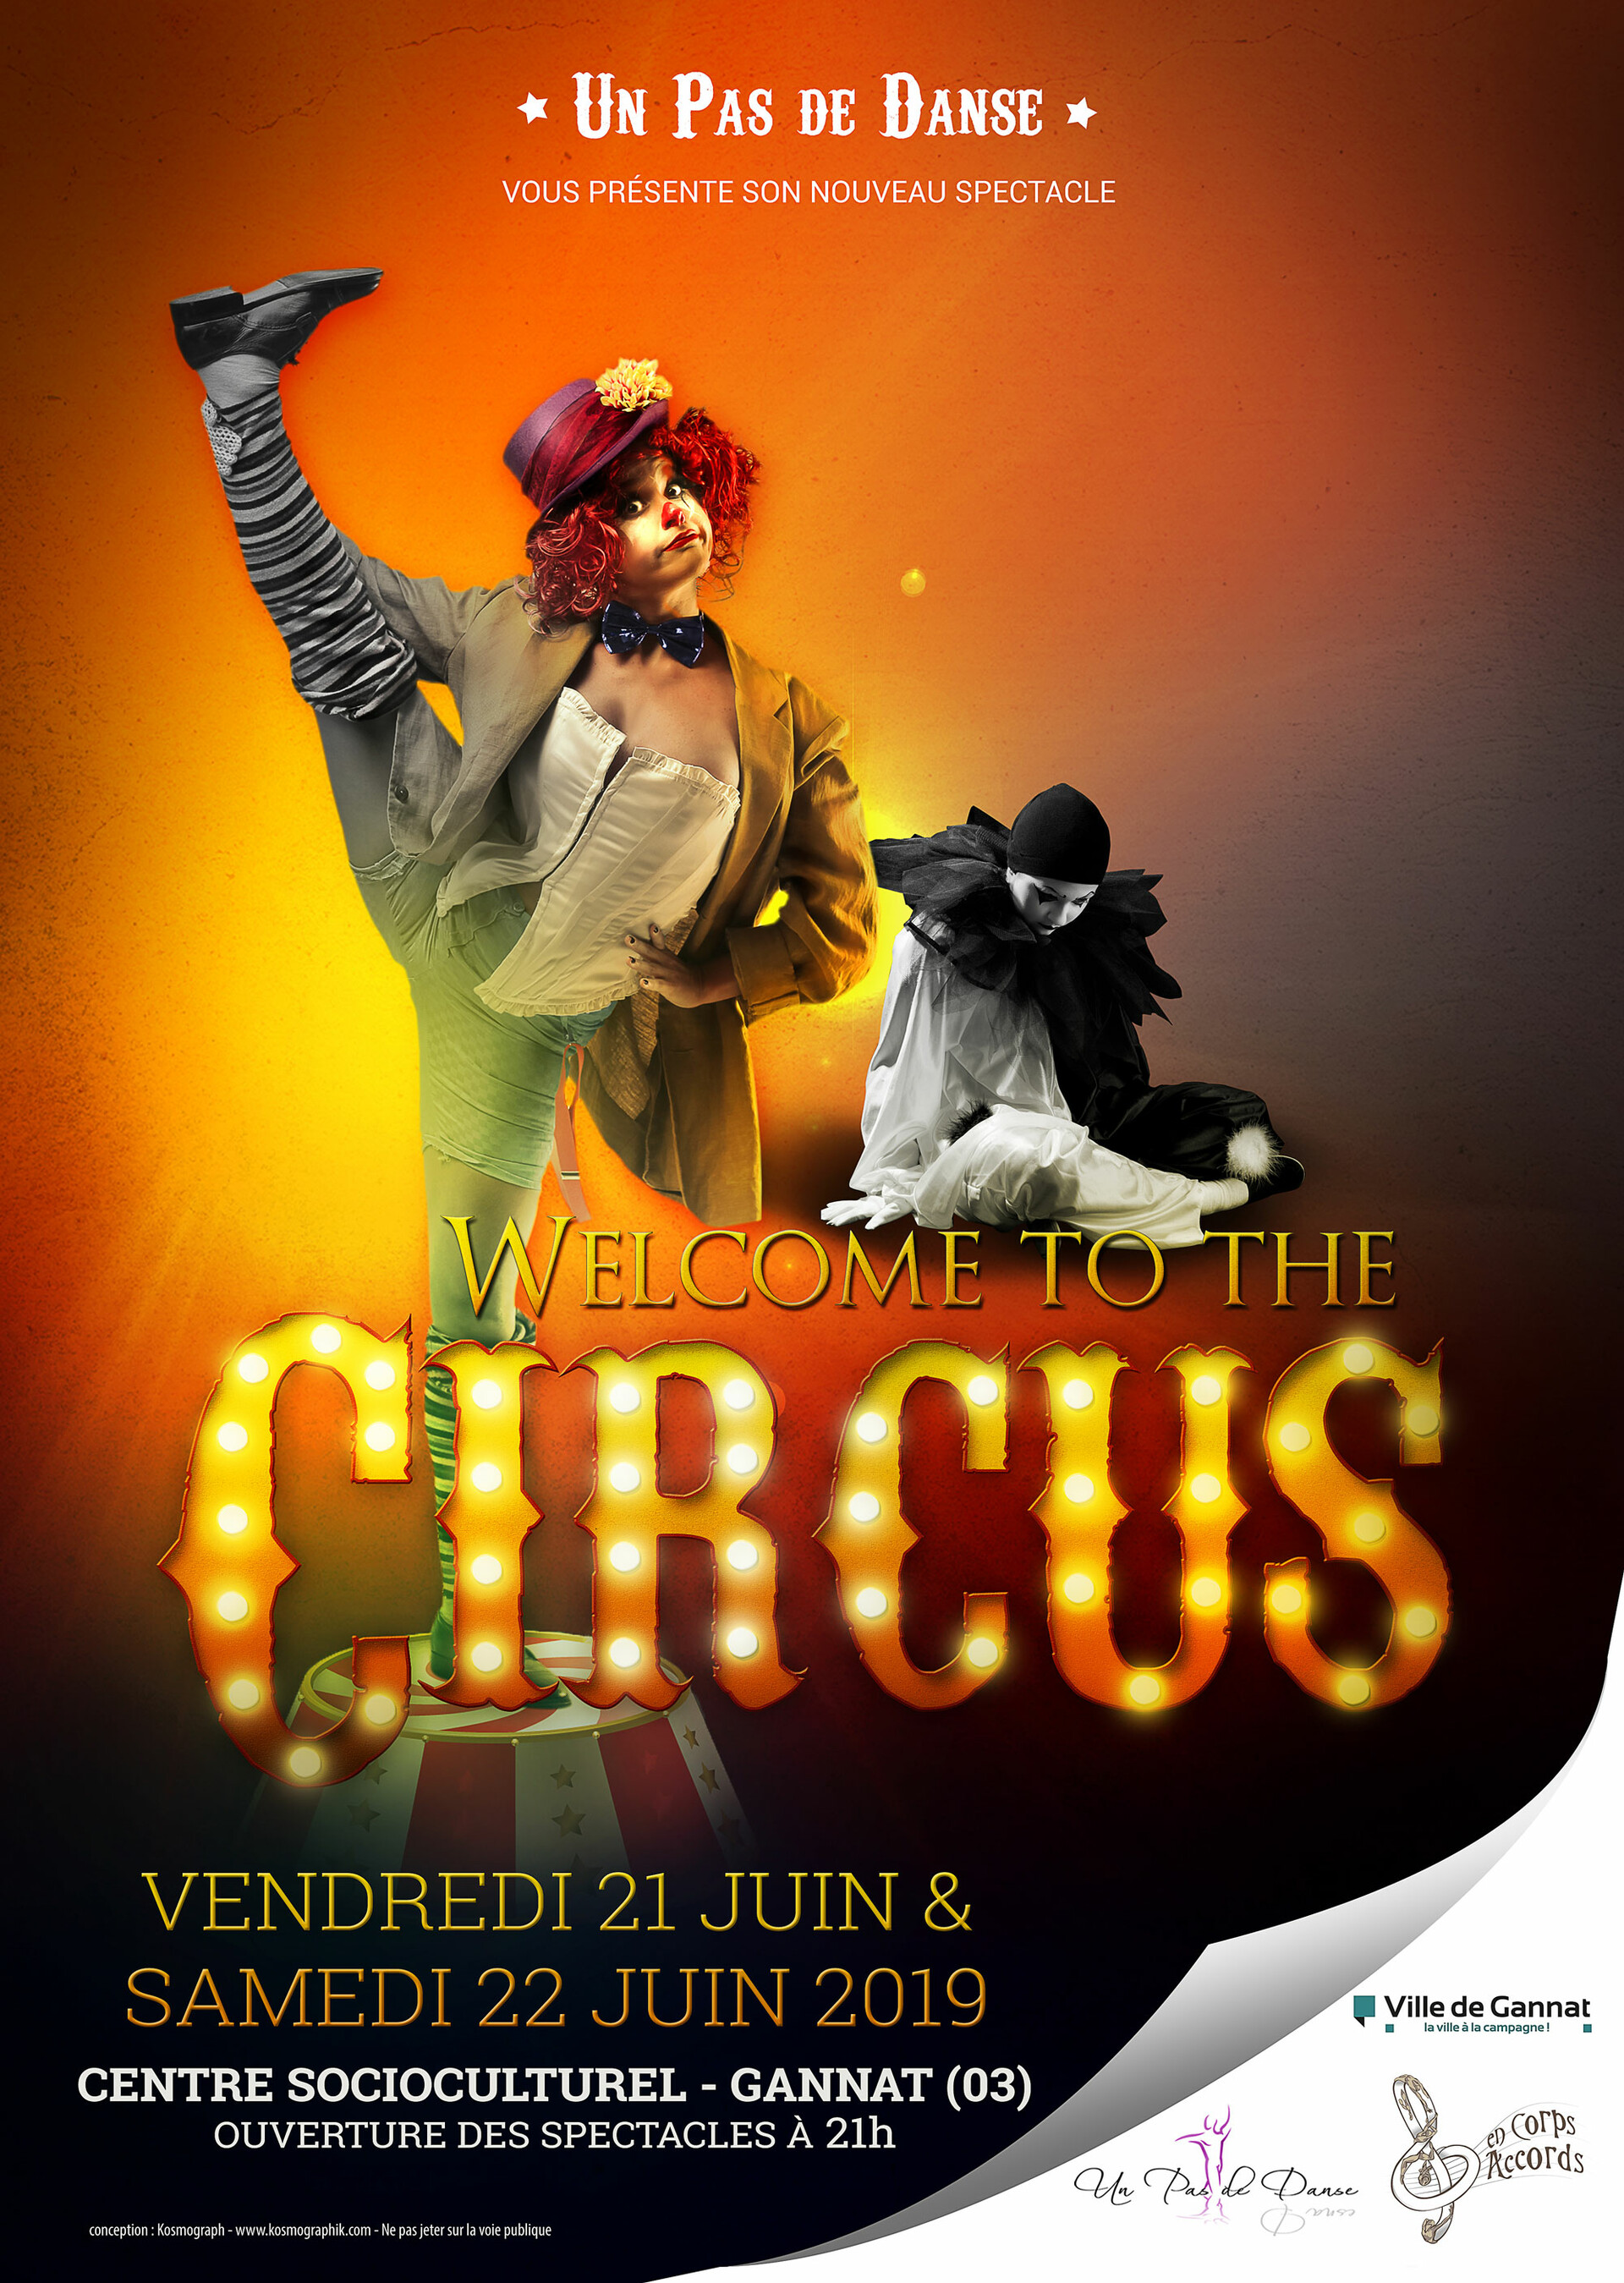 ArtStation - Spectacle de danse Welcome to the Circus